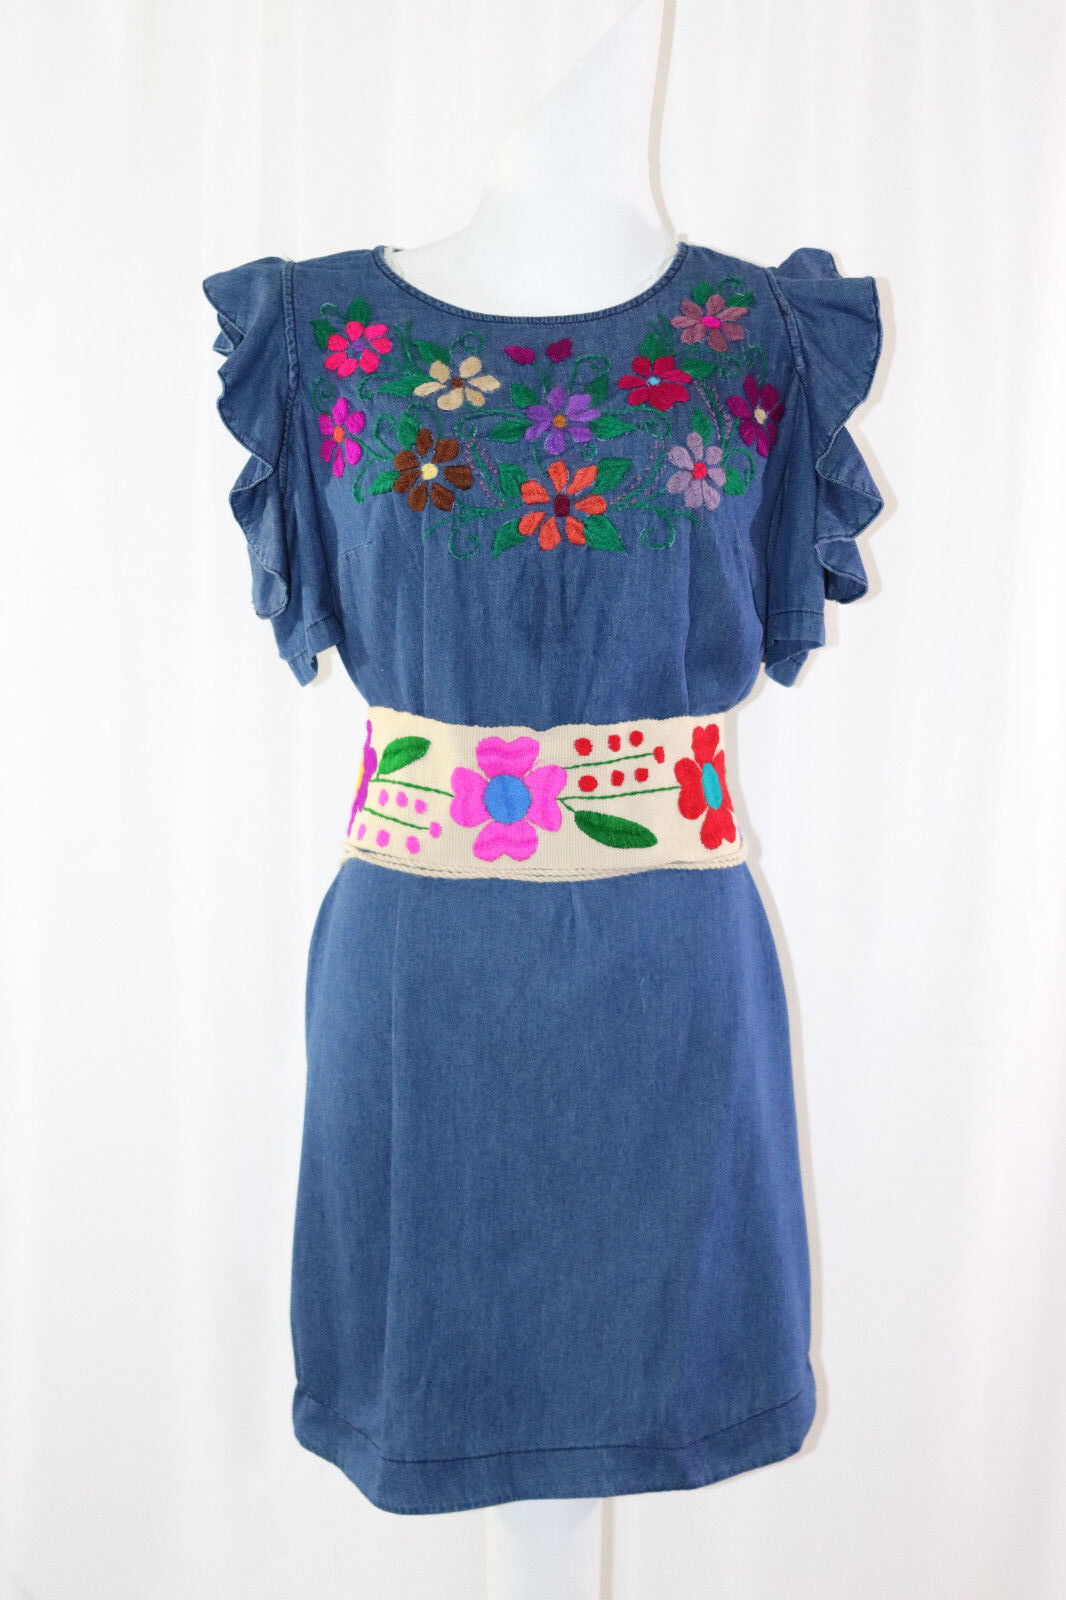 Women's Hand Embroidered Denim Tunic Dress - Max 79% OFF New product w Belt Medium Cold